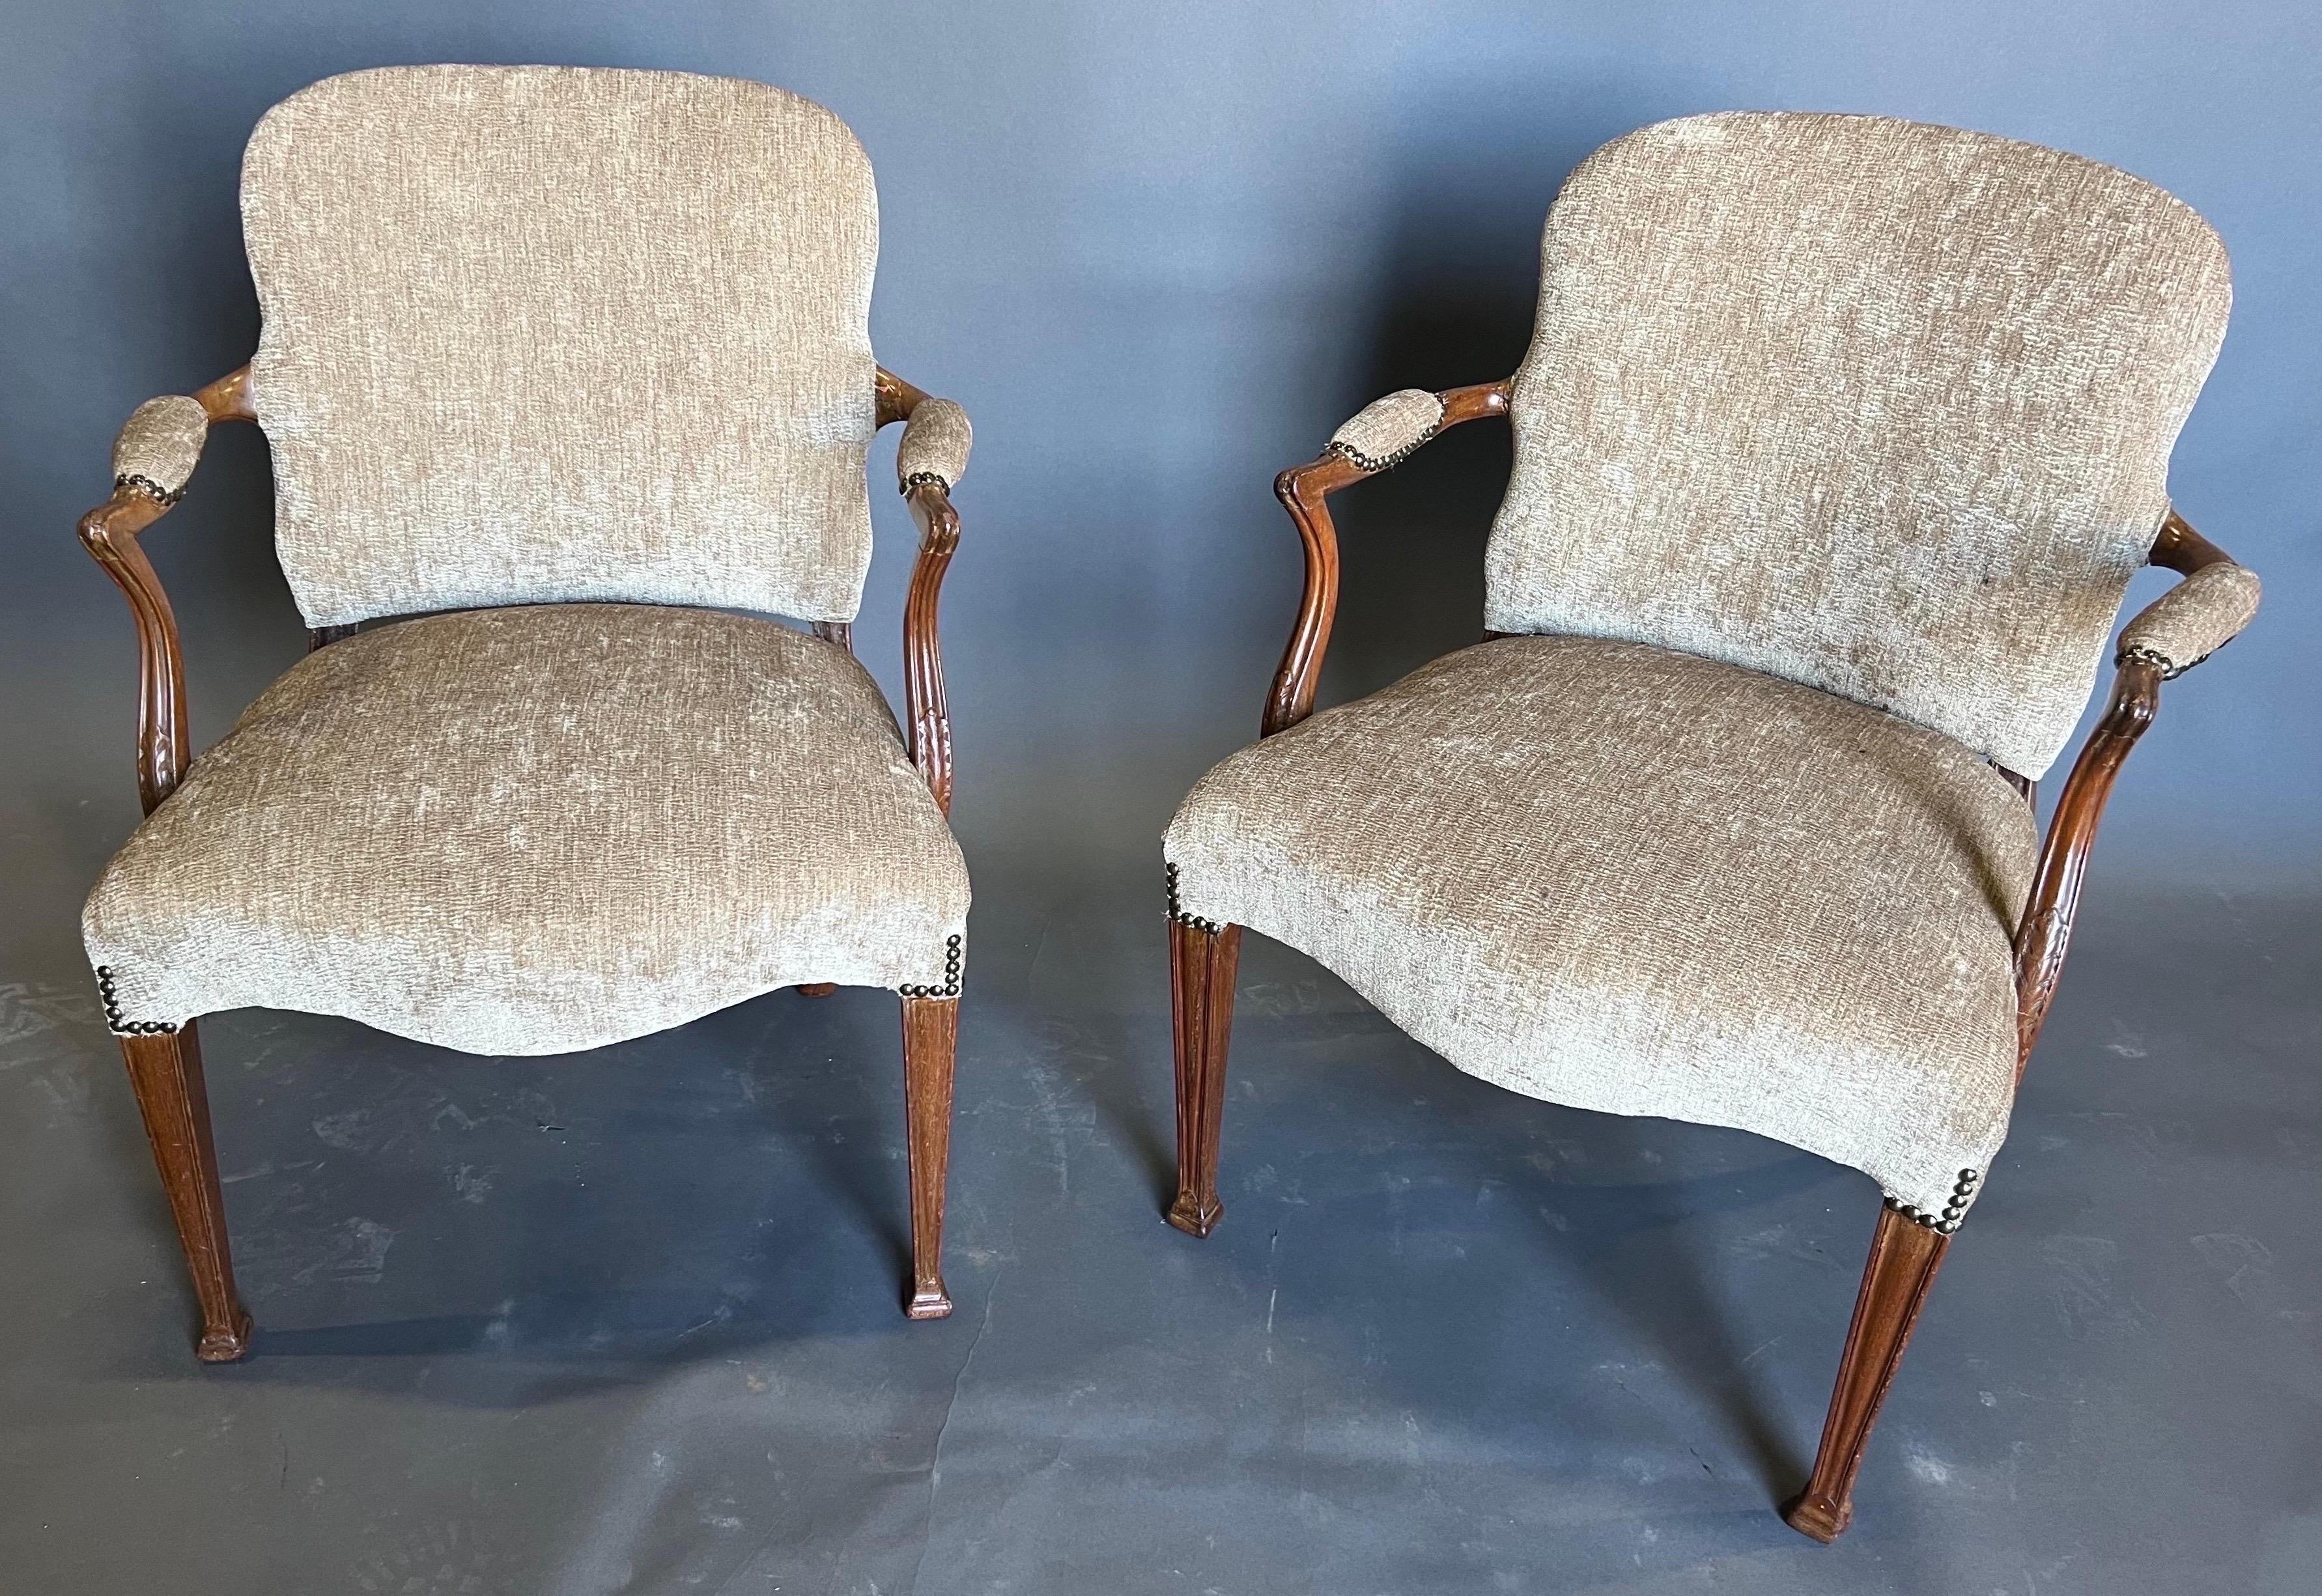 Very handsome pair of 19th century Georgian style mahogany armchairs with tapered and molded legs. There are 2 pair available.